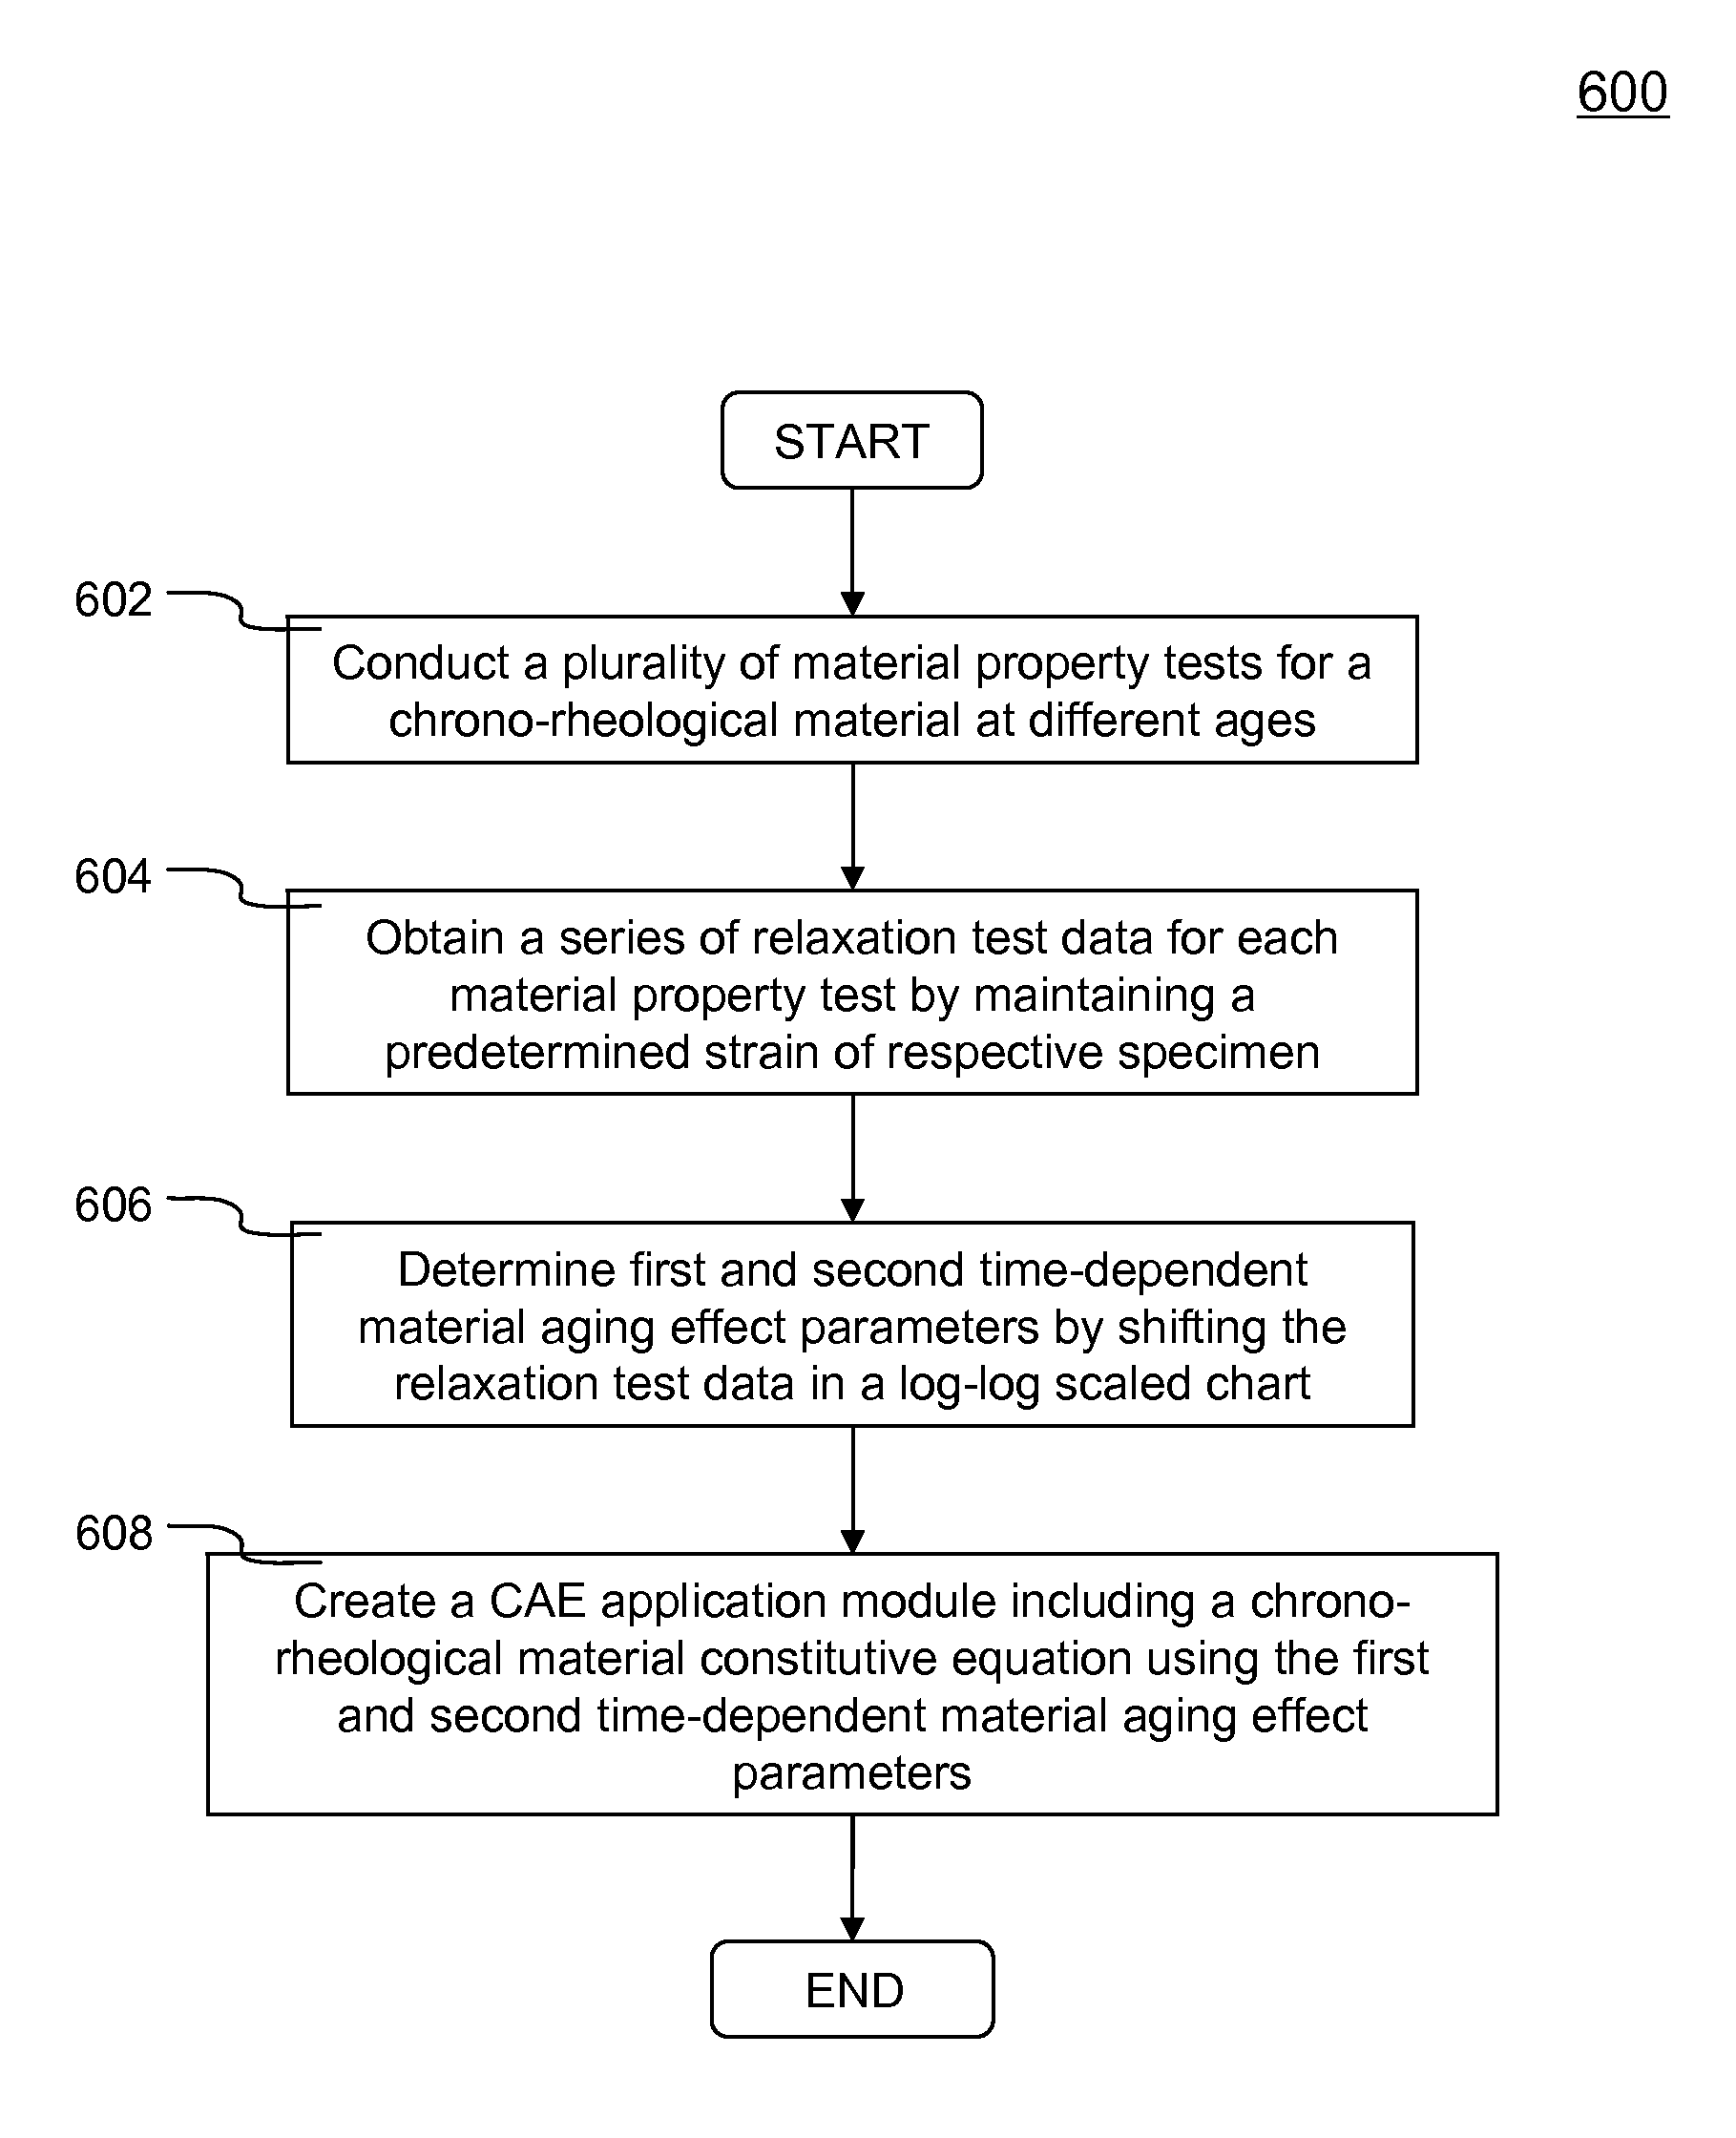 Methods and systems for enabling simulation of aging effect of a chrono-rheological material in computer aided engineering analysis